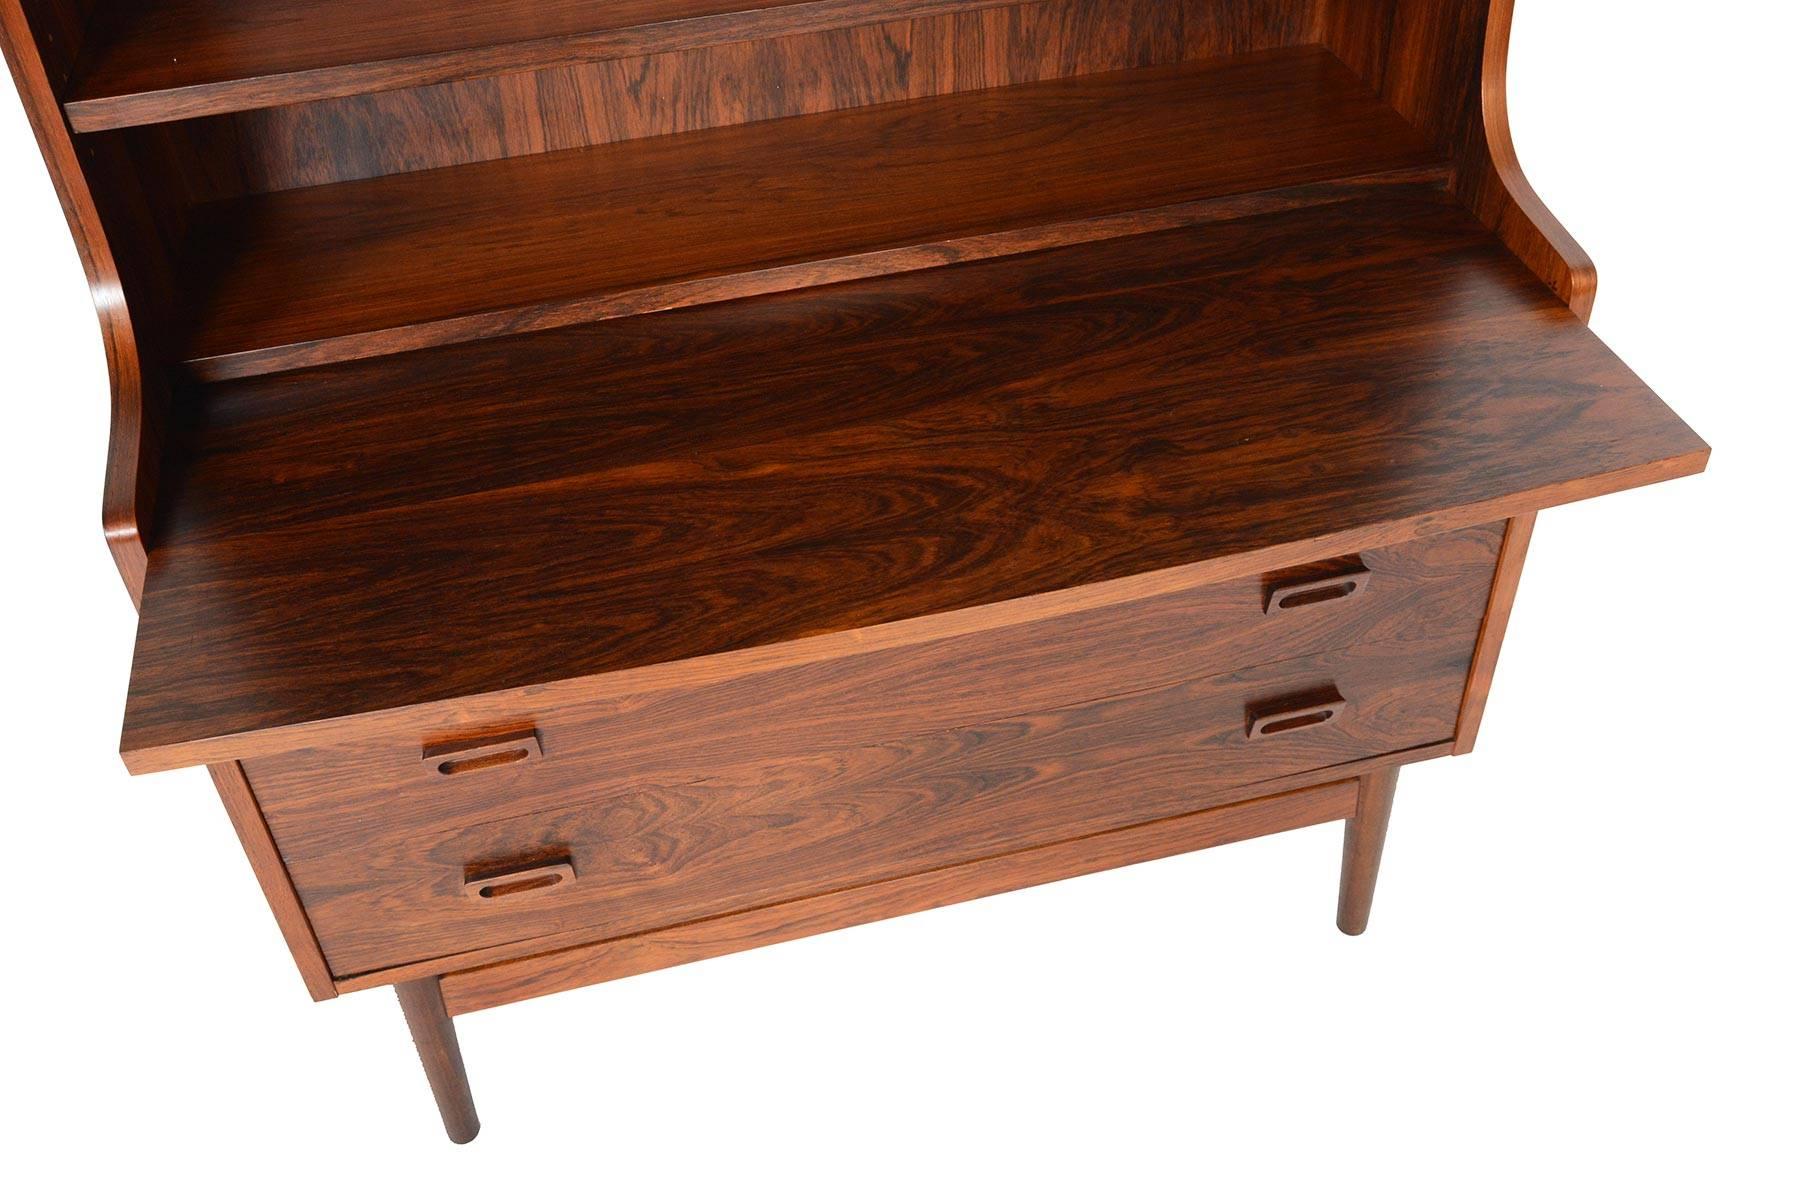 20th Century Danish Modern Midcentury Bookcase or Secretary in Rosewood by Johannes Sorth